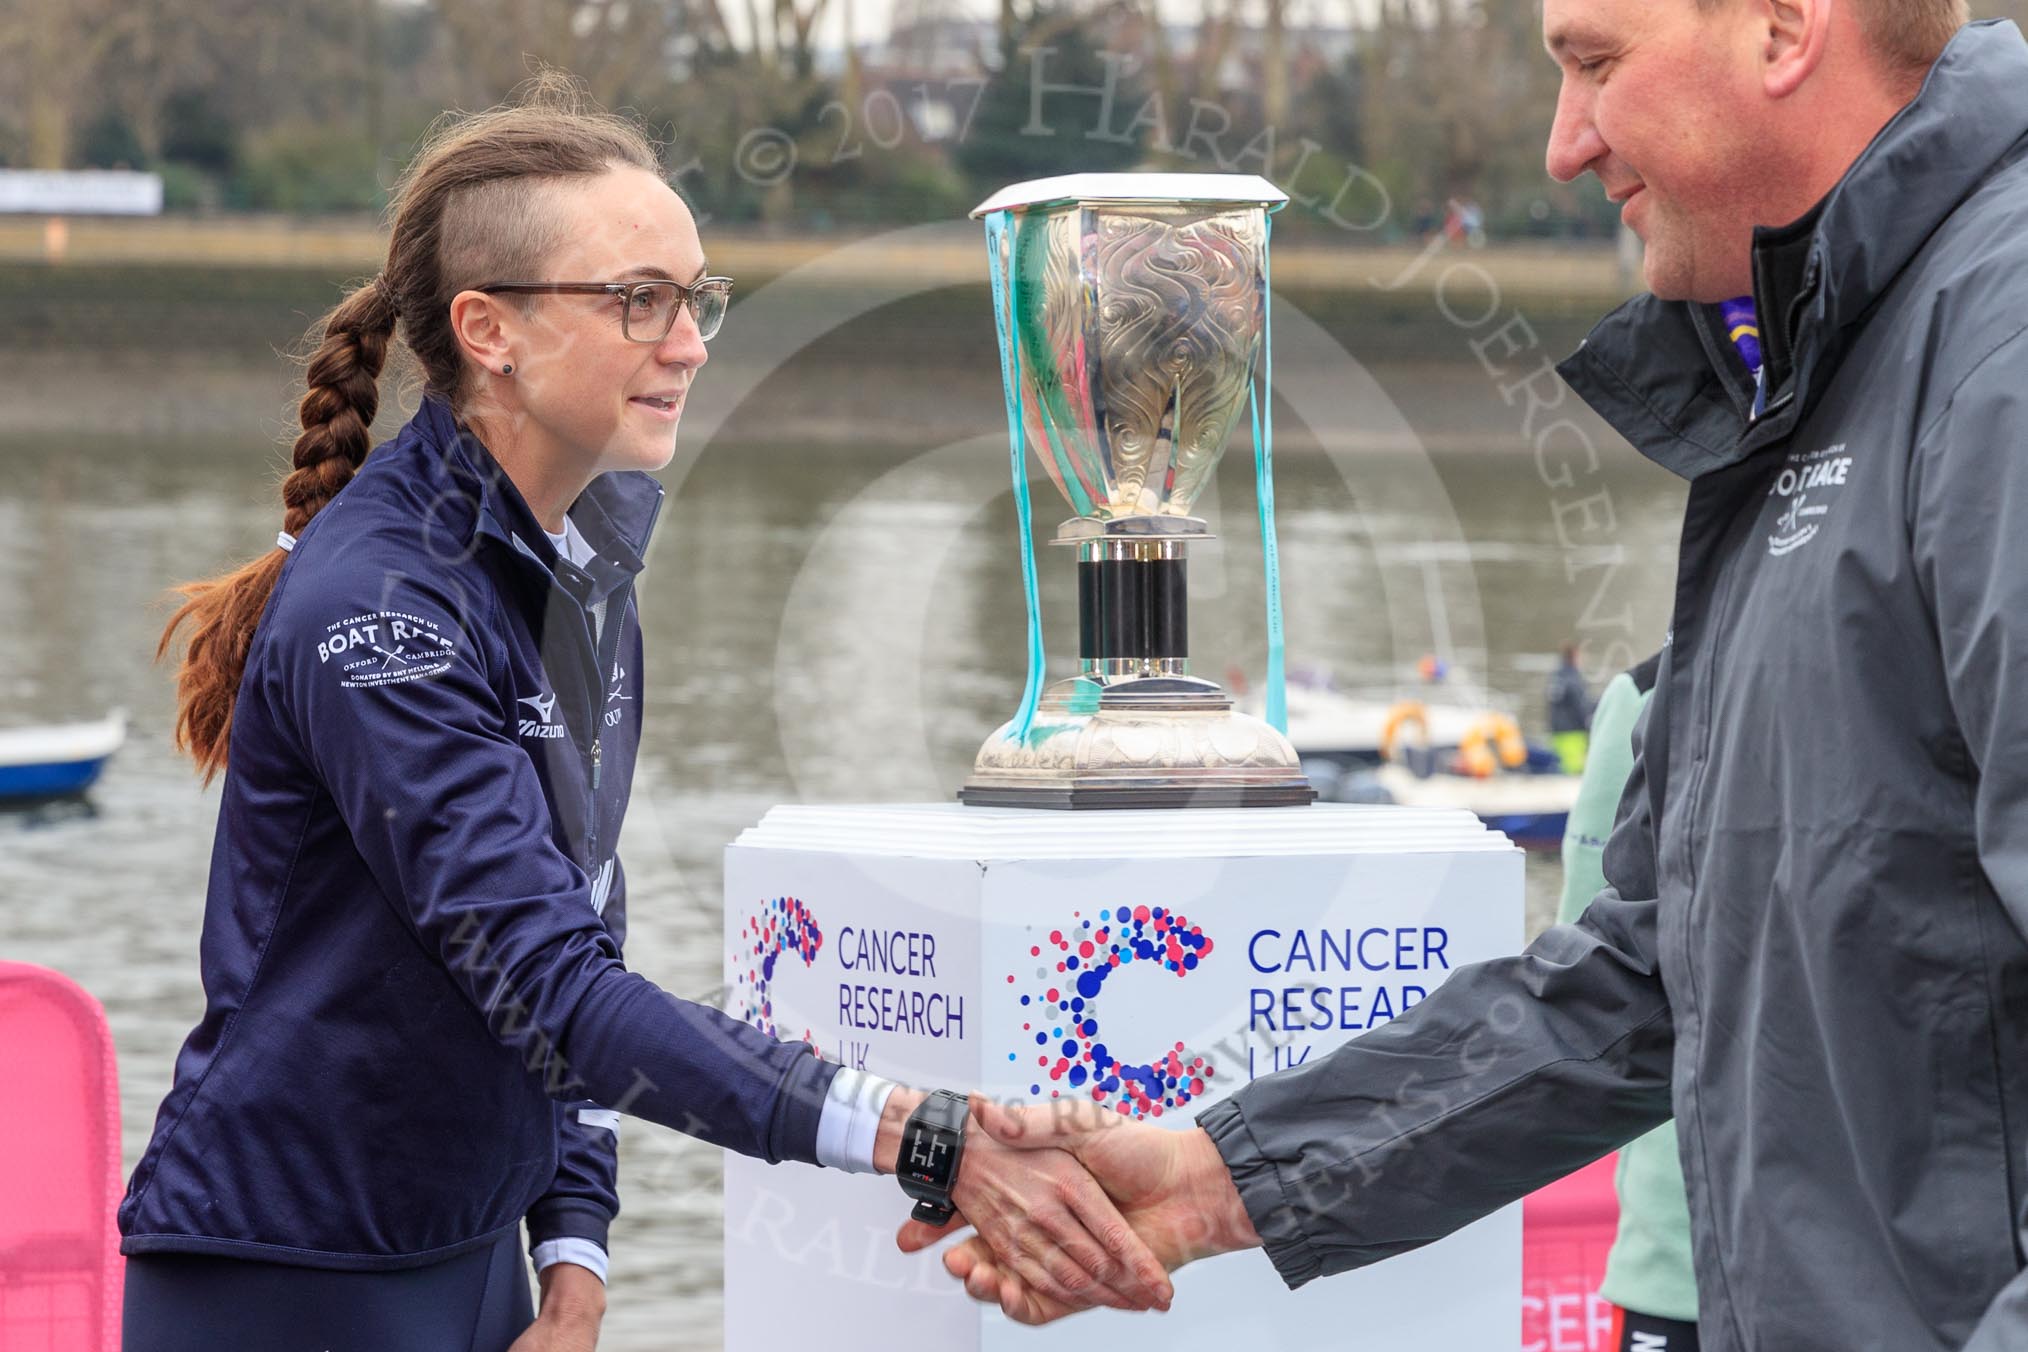 The Cancer Research UK Women's Boat Race 2018: OUWBC president Katherine Erickson shaking hands with race umpire Sir Matthew Pinsent after the toss, in front of the Women's Boat Race trophy.
River Thames between Putney Bridge and Mortlake,
London SW15,

United Kingdom,
on 24 March 2018 at 14:41, image #48